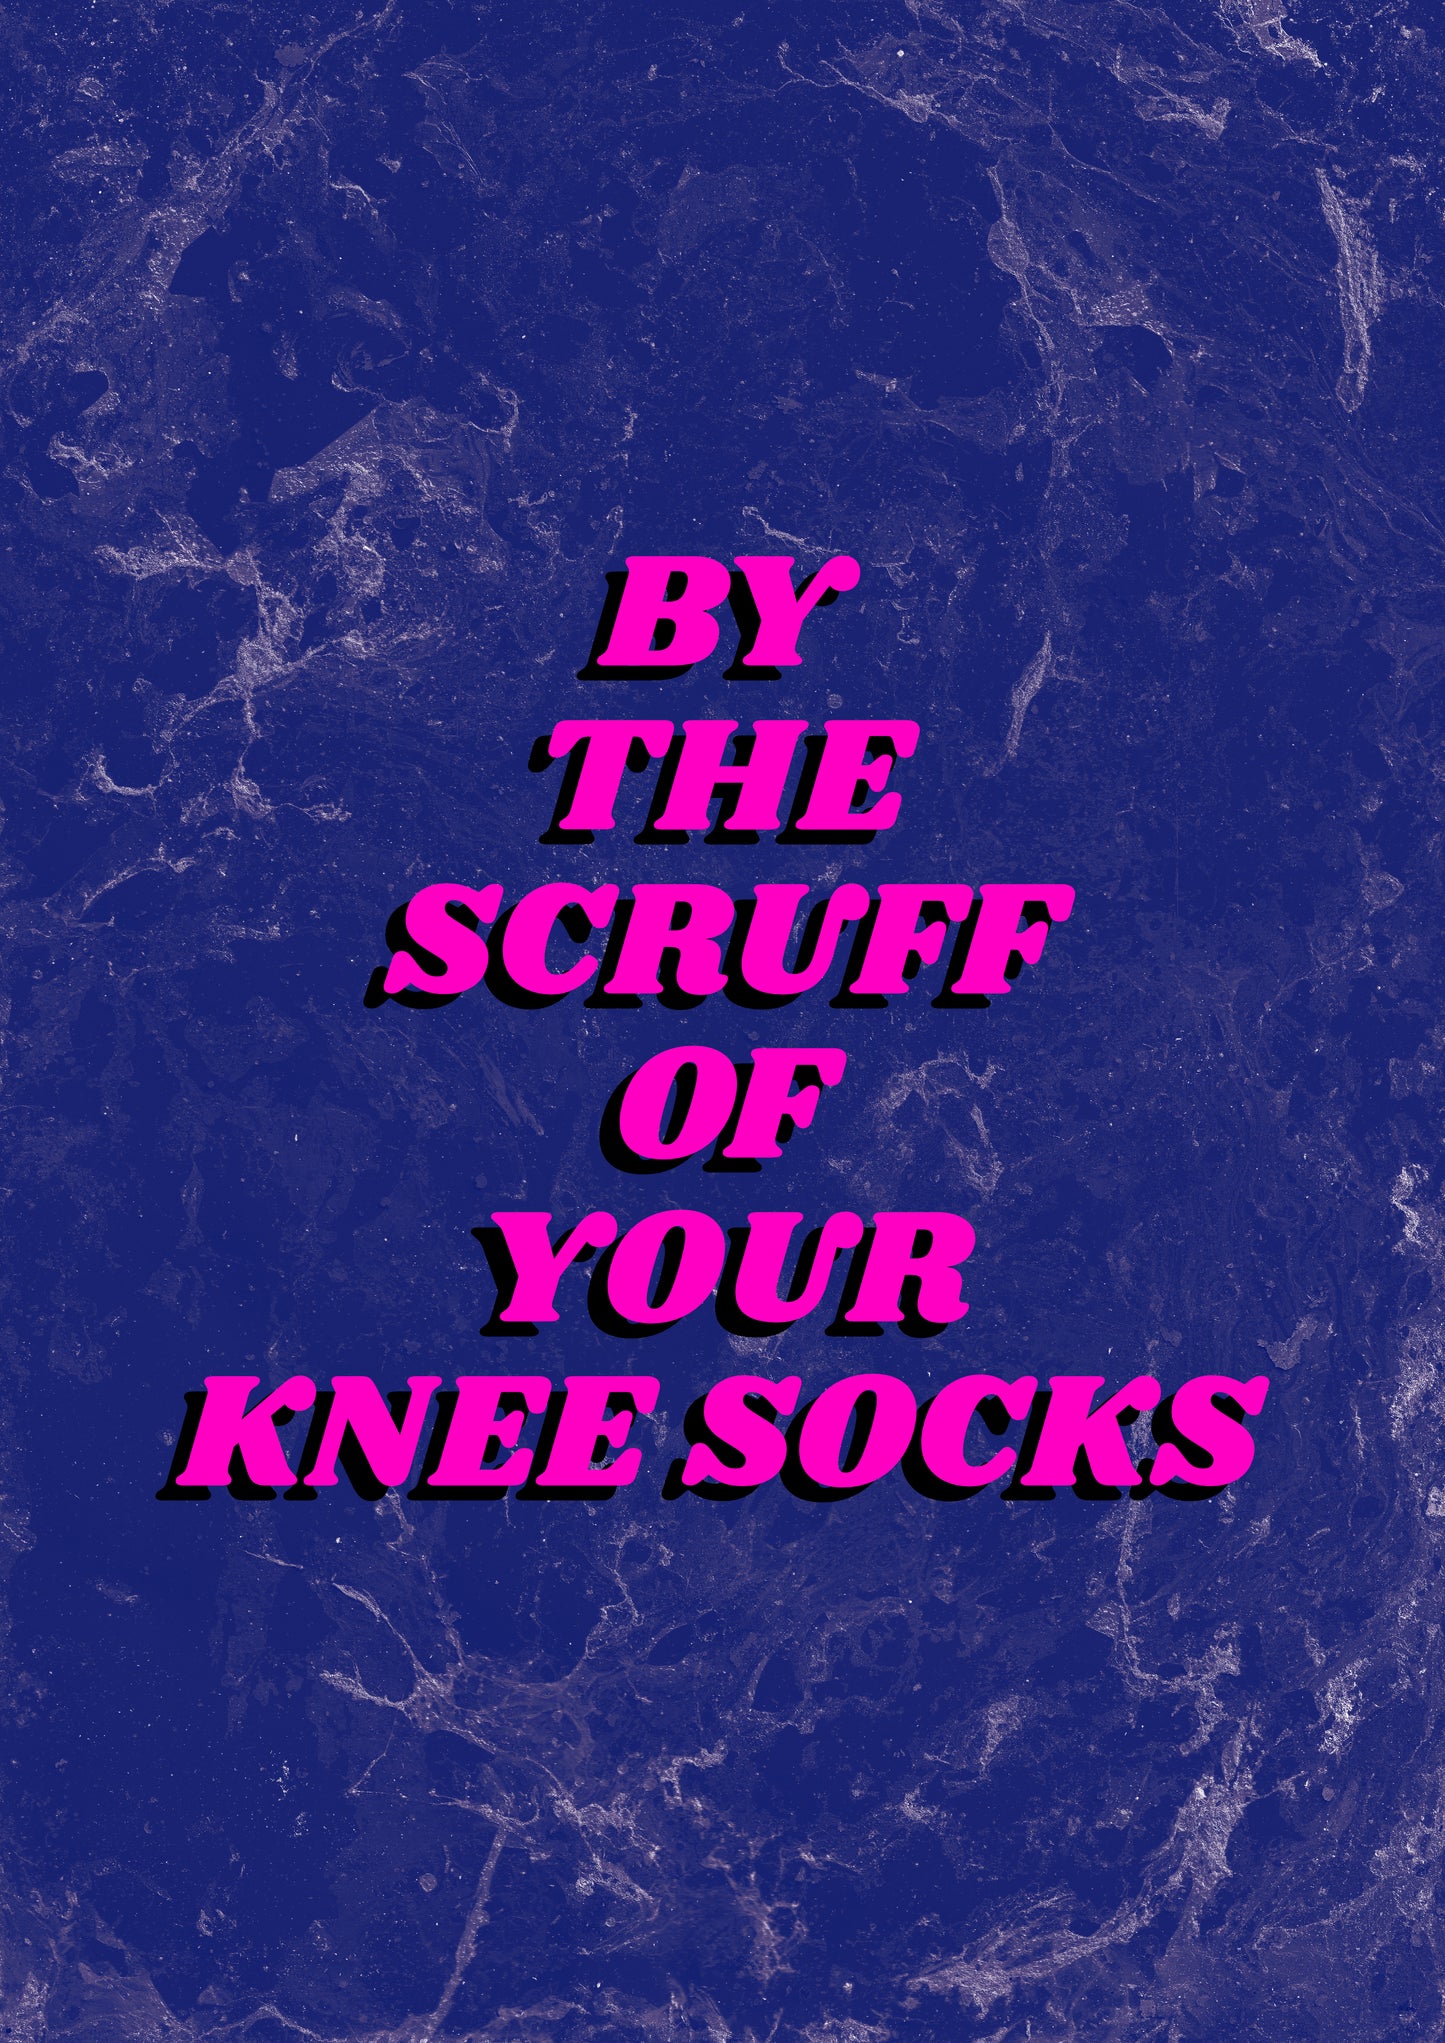 BY THE SCRUFF OF YOUR KNEE SOCKS